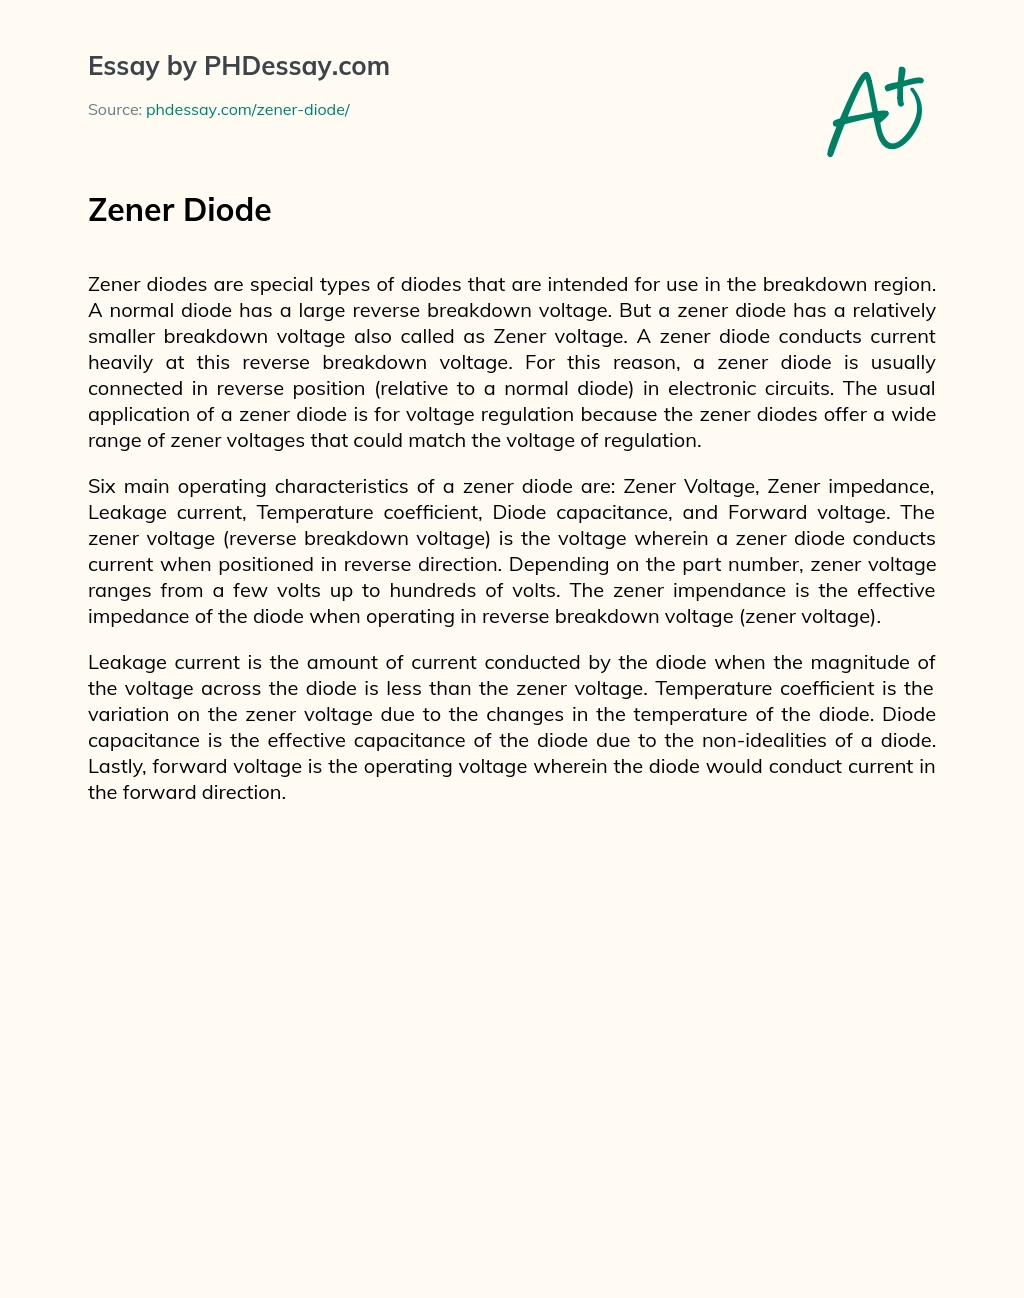 Zener Diodes: A Breakdown of Their Characteristics and Applications essay